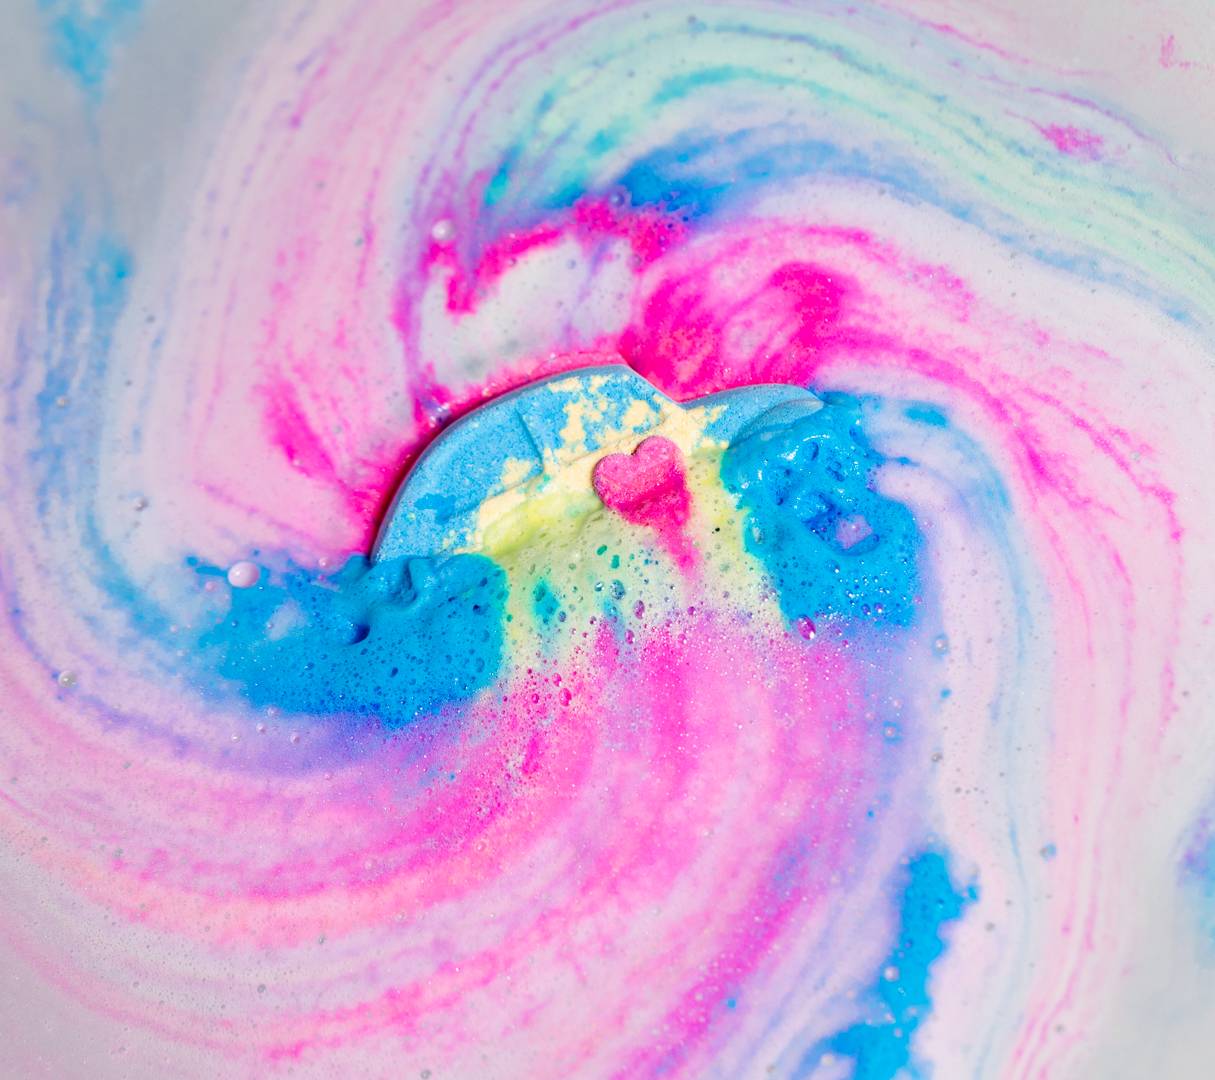 Love Bug bath bomb dissolves in the water leaving a swirling galaxy of vivid pinks, blues and yellows.